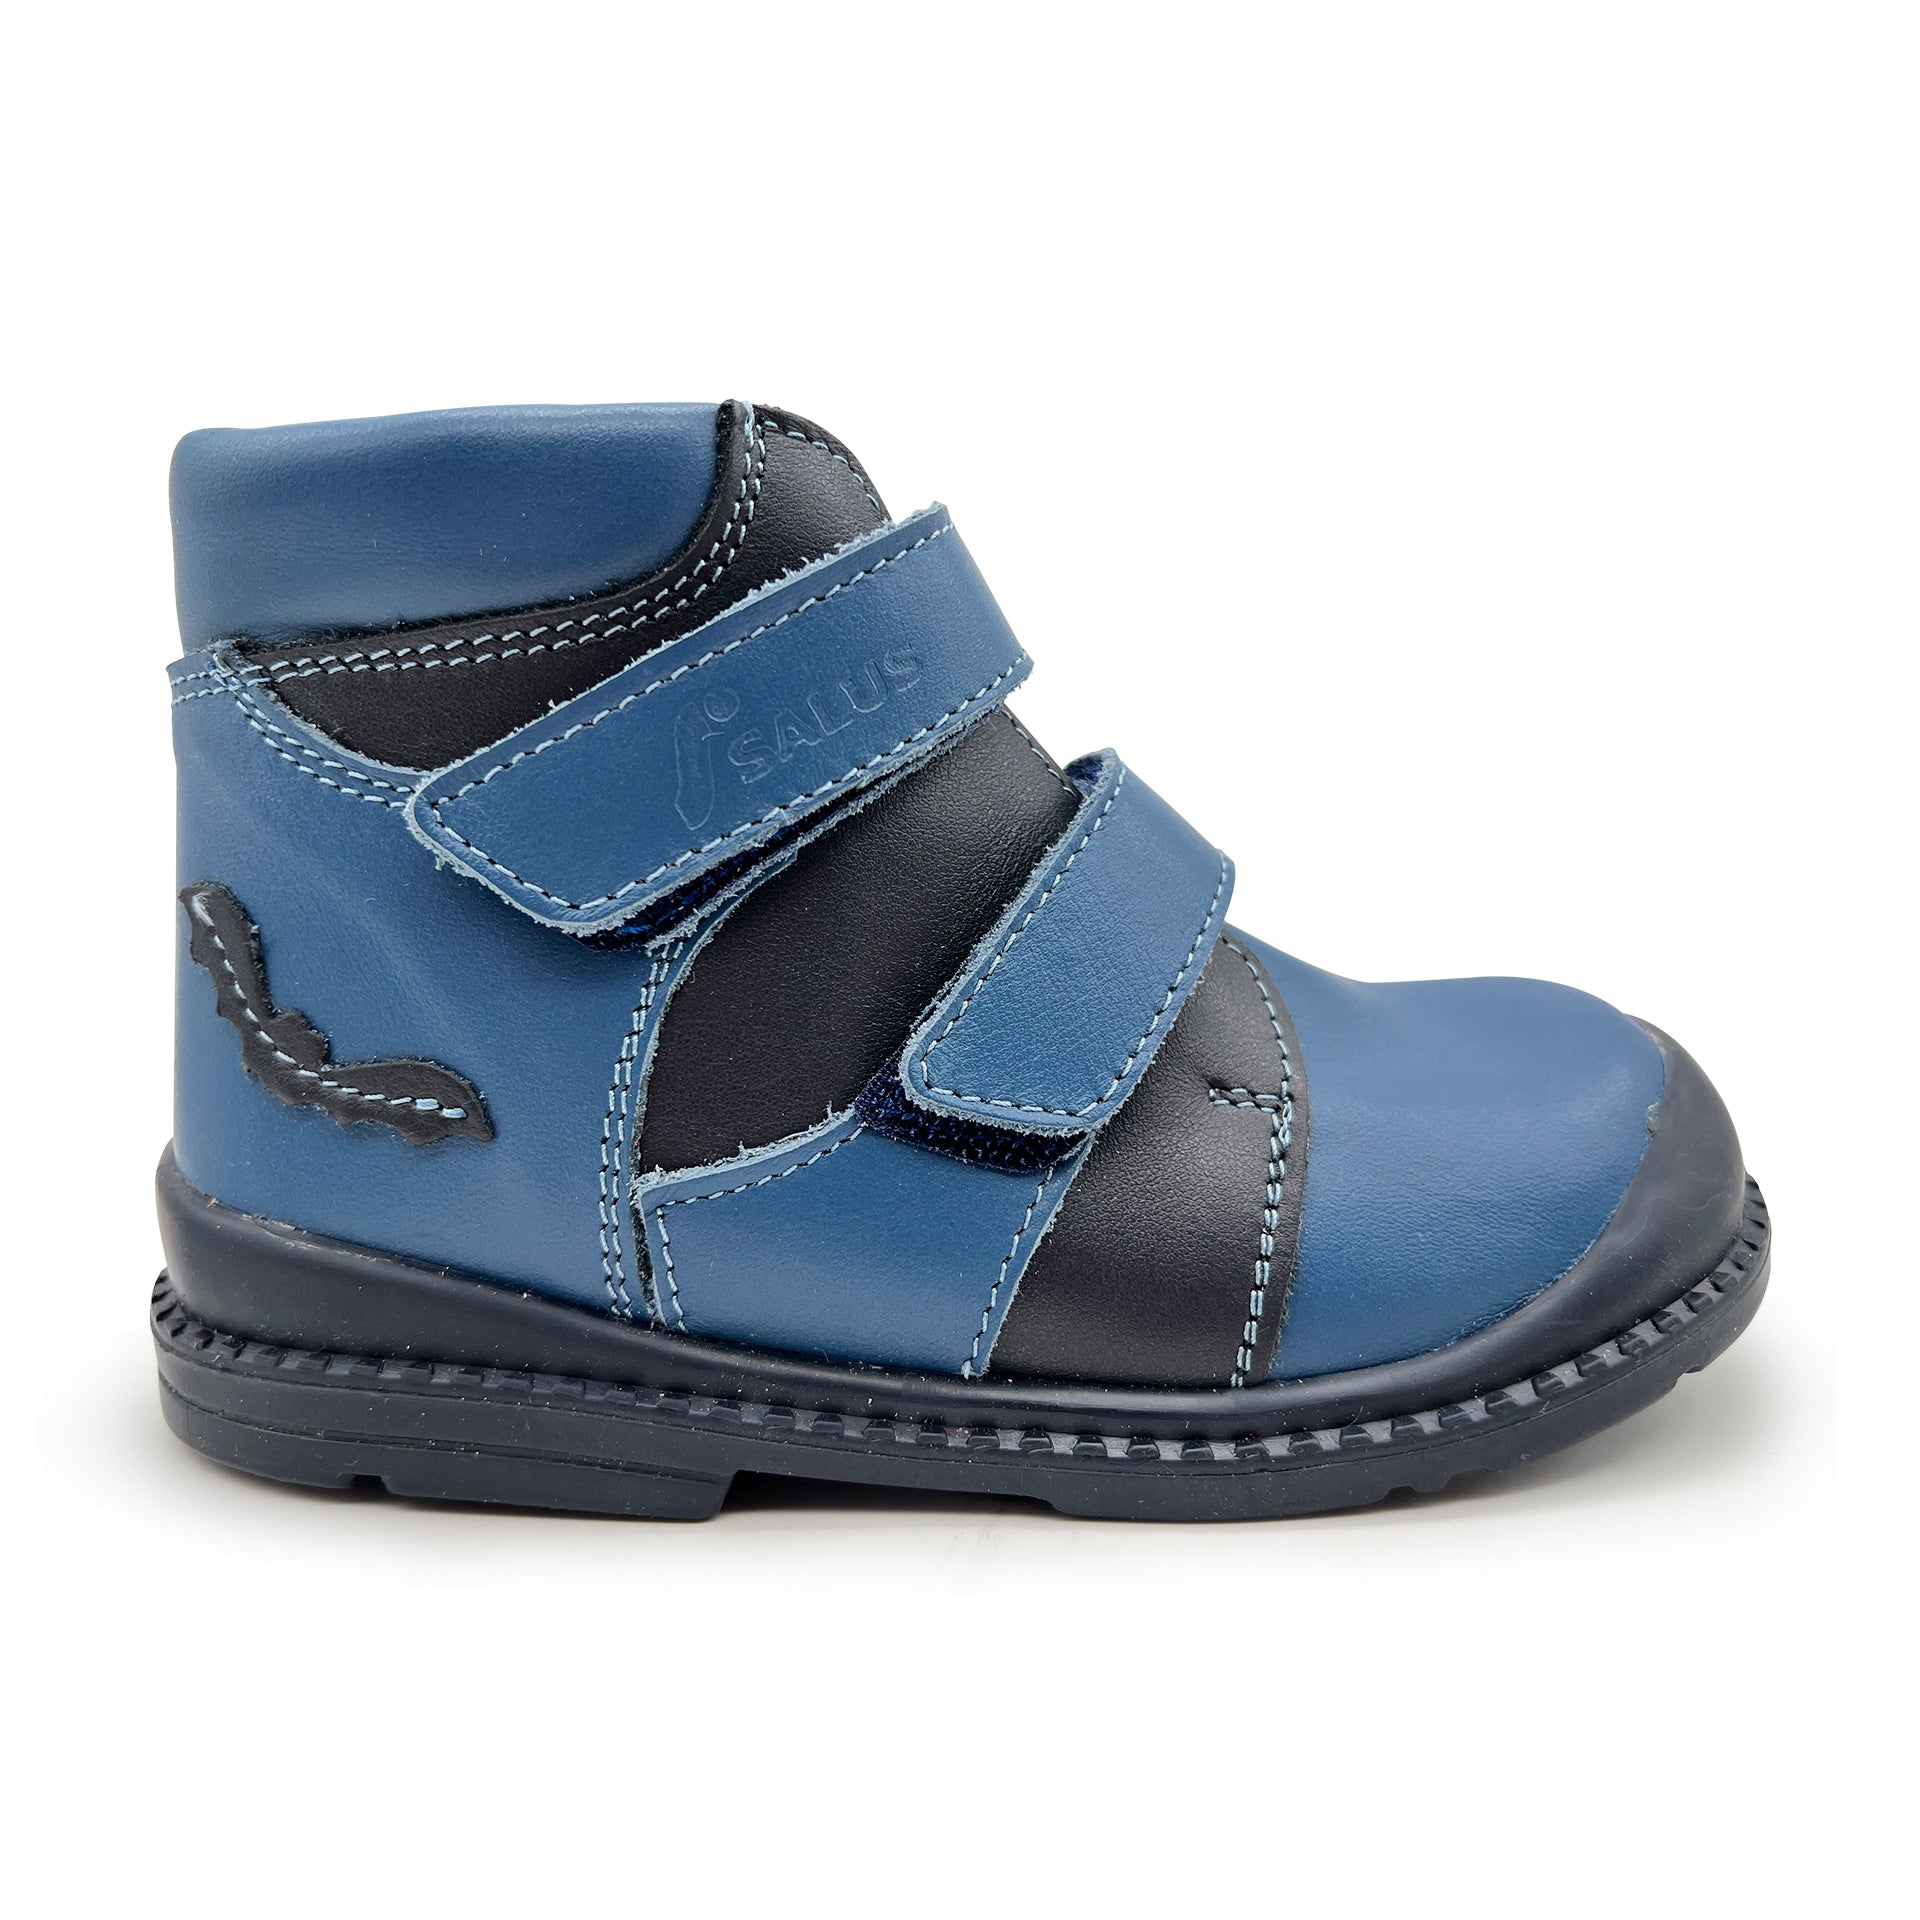 Healthy shoes for toddlers - Shop the best healthy shoes for infants ...